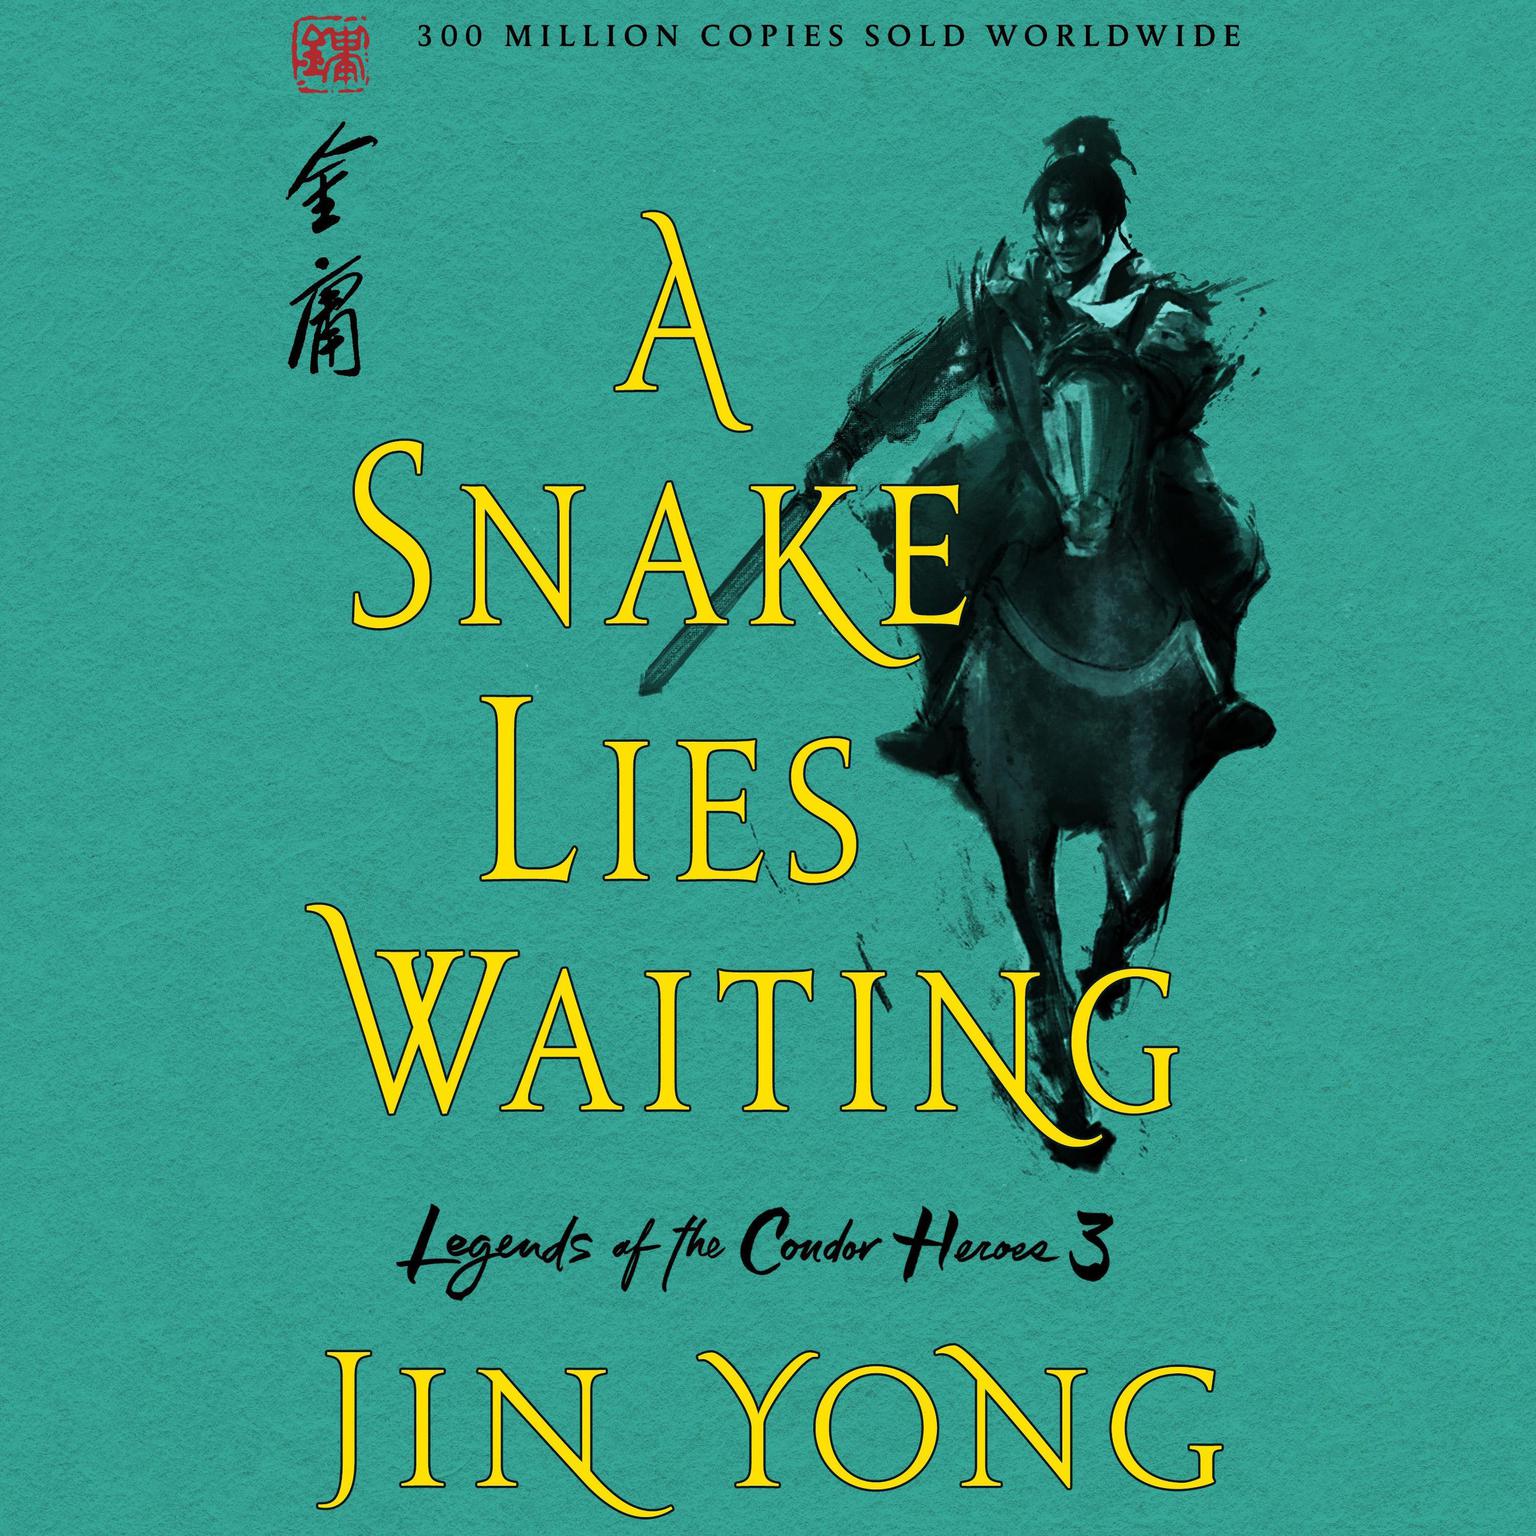 A Snake Lies Waiting: The Definitive Edition Audiobook, by Jin Yong